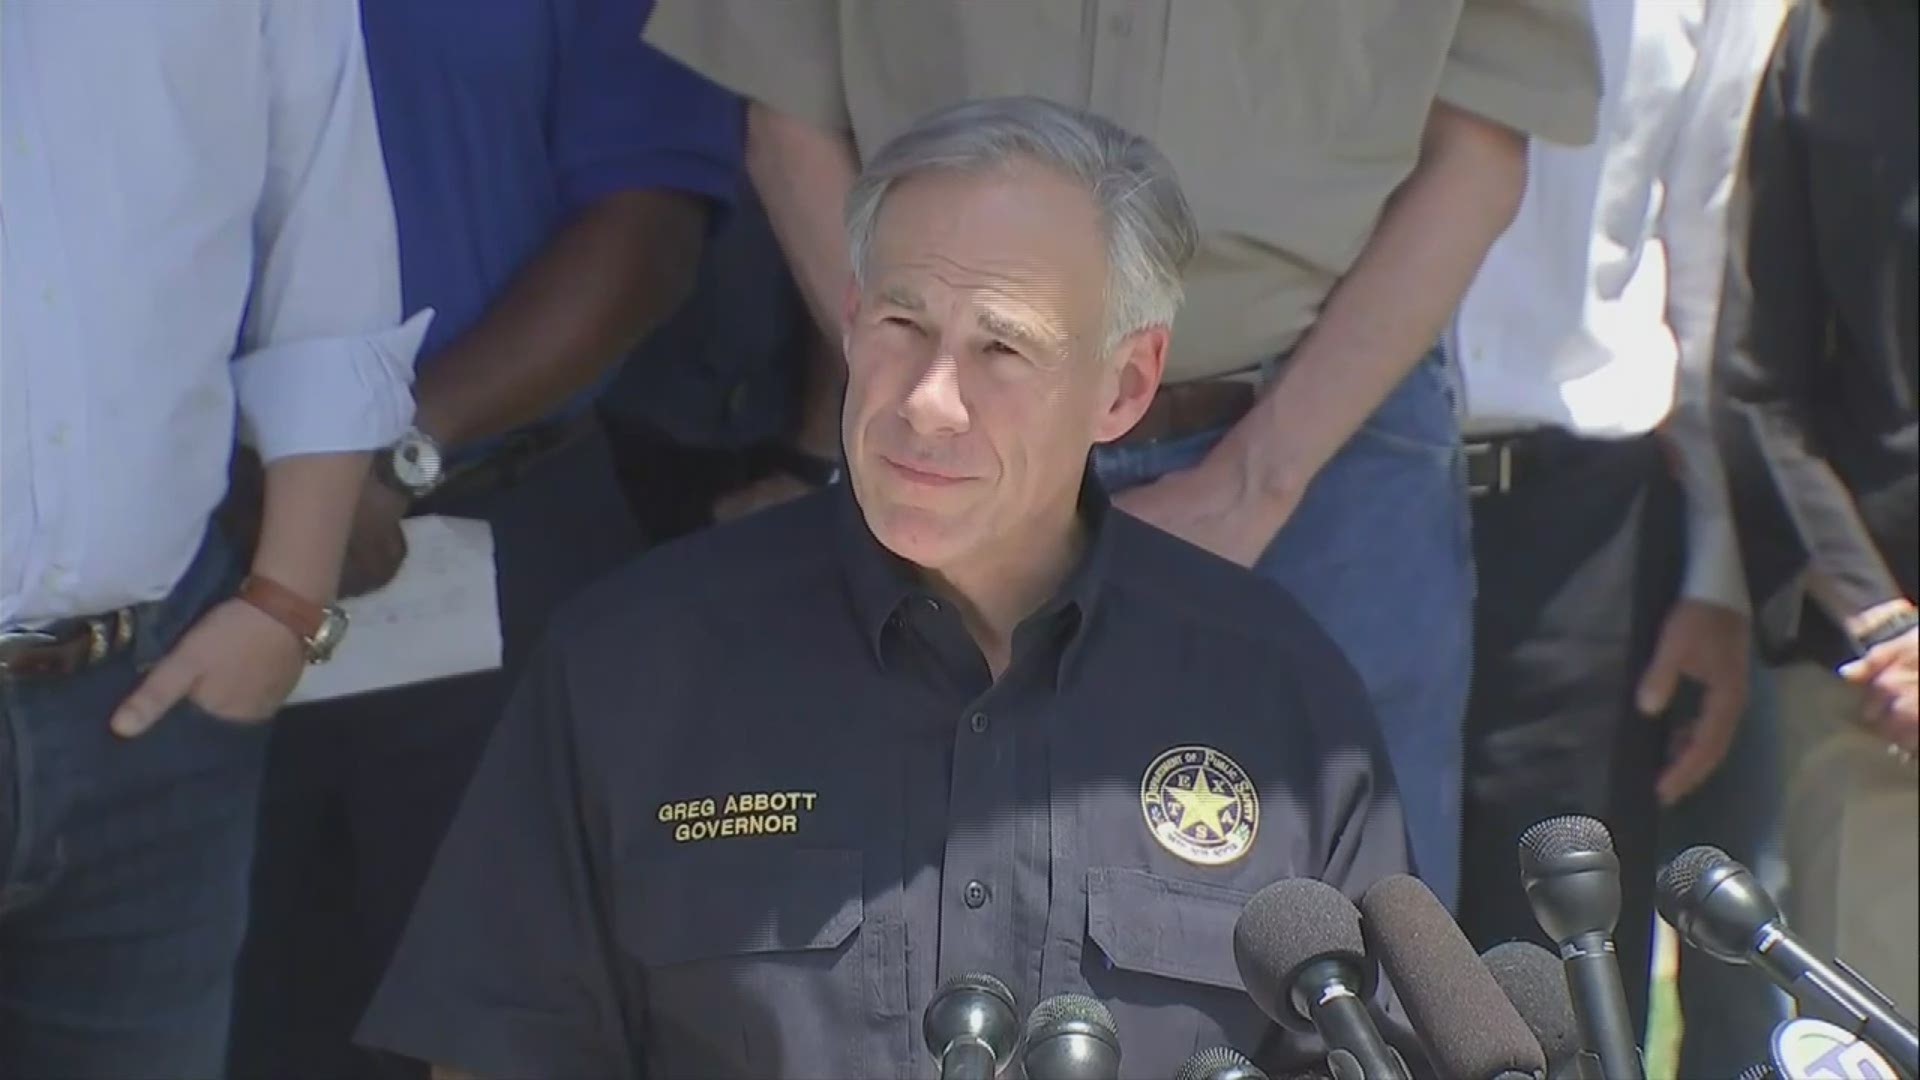 Gov. Greg Abbott discusses measures he plans to take to address gun violence after a deadly school shooting in the Houston suburb of Santa Fe.